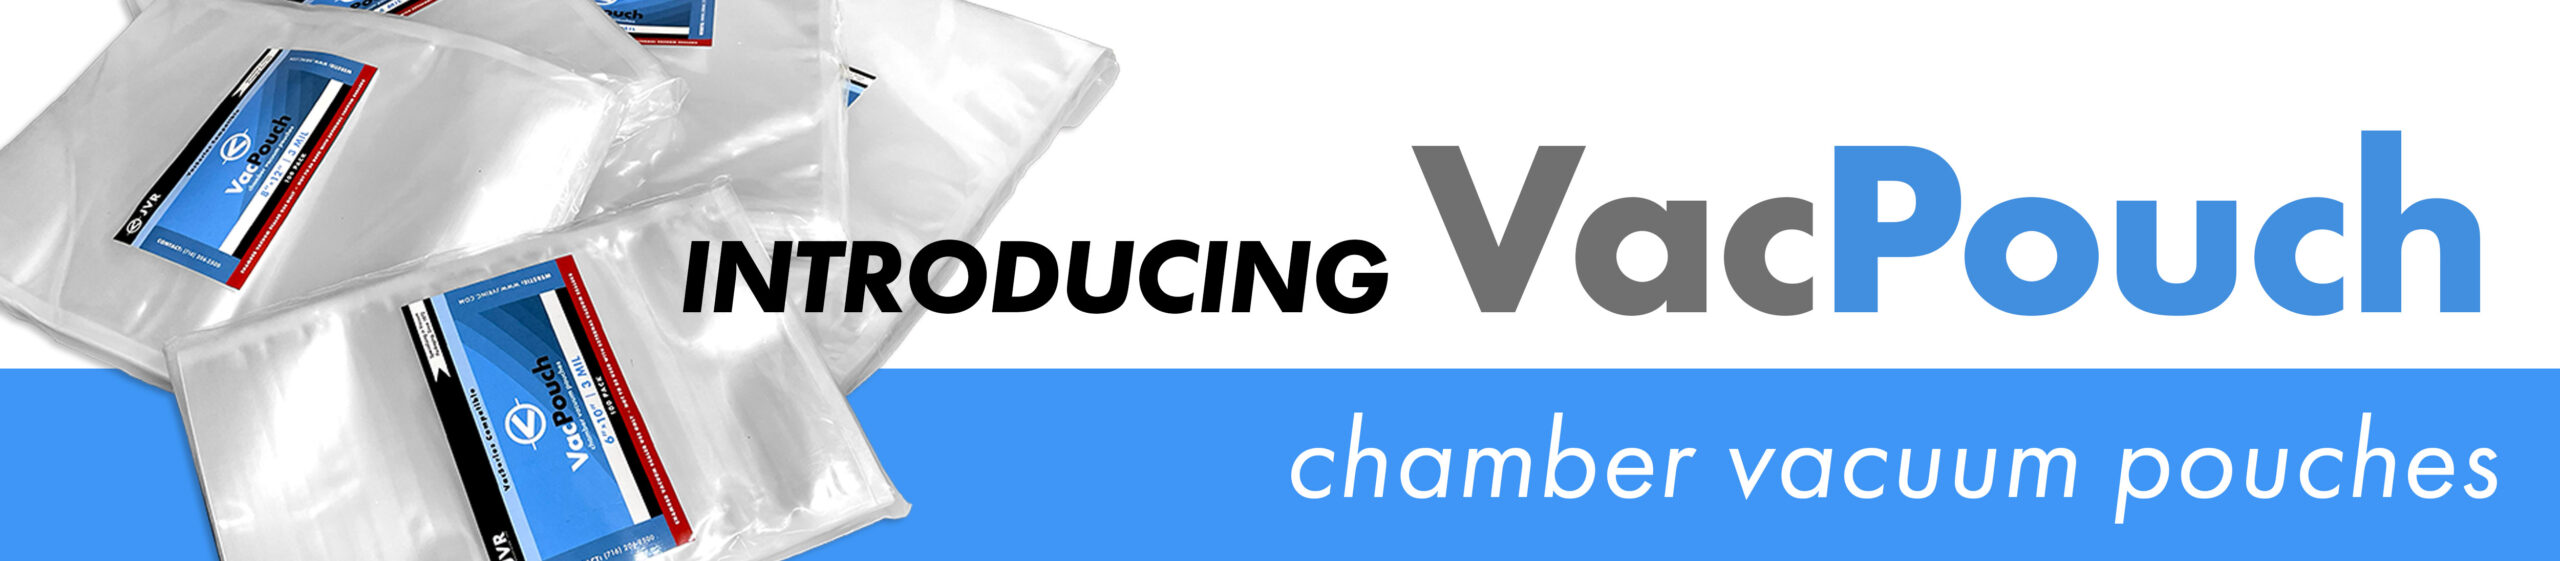 Introducing VacPouch - chamber vacuum pouches